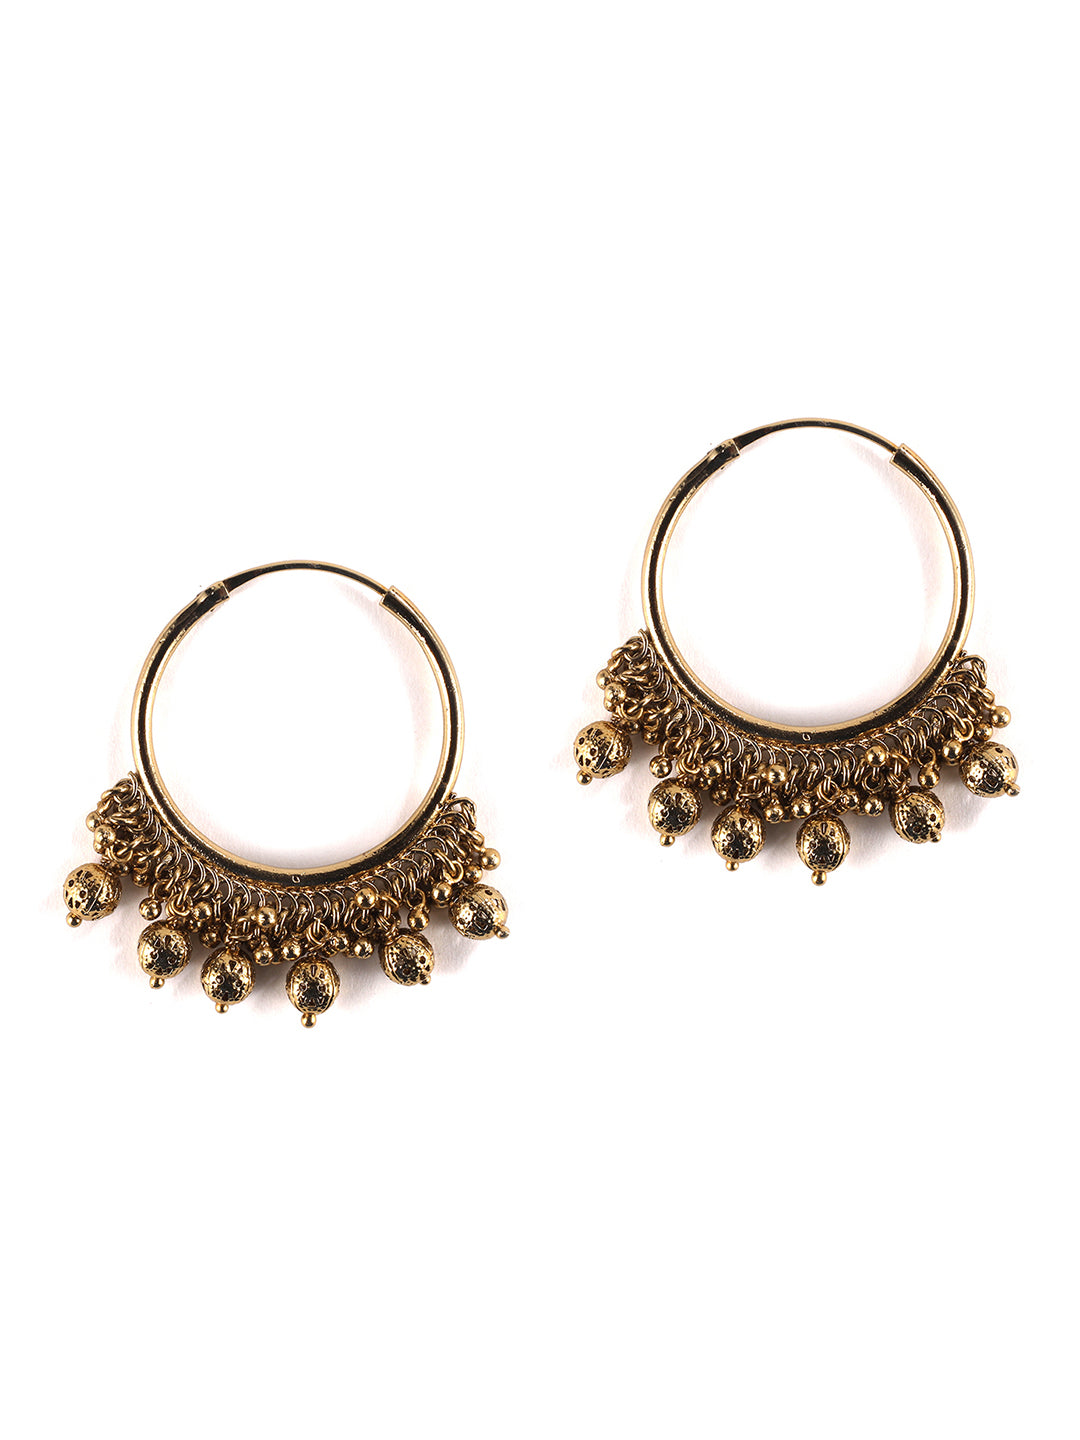 Vintage Indian Hoops with Golden Clusters